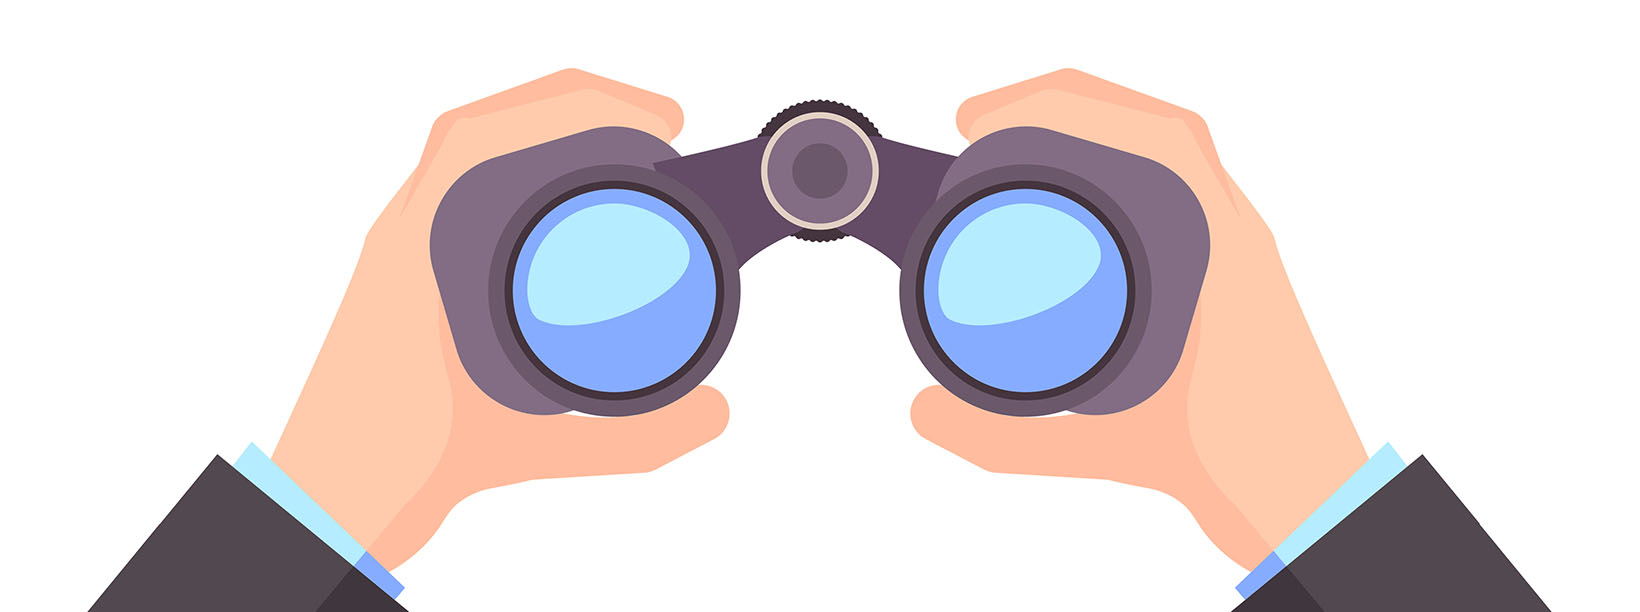 IT Discovery can be made as easy as looking through binoculars when it's primary IT priority